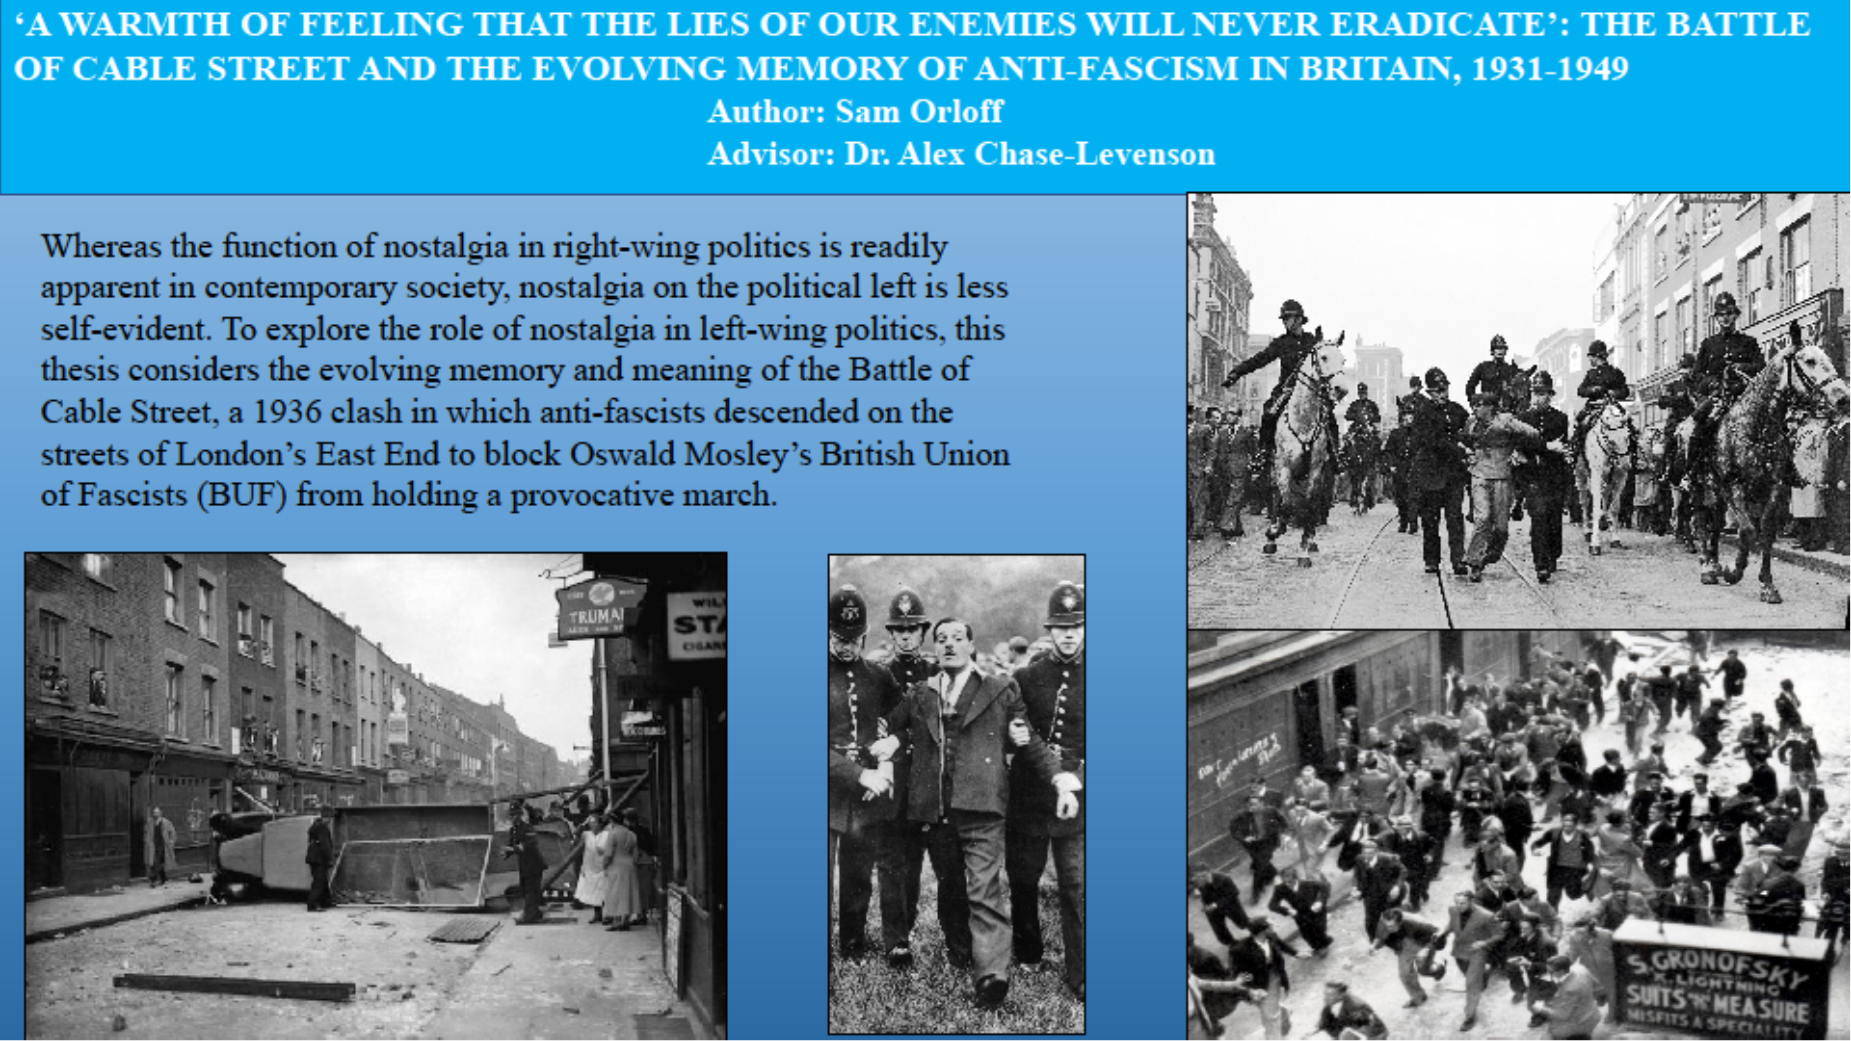 'A Warmth of Felling that the Lies of Our Enemies Will Never Eradicate': The Battle of Cable Street and the Evolving Memory of Anti Fascism in Britain, 1931-1949